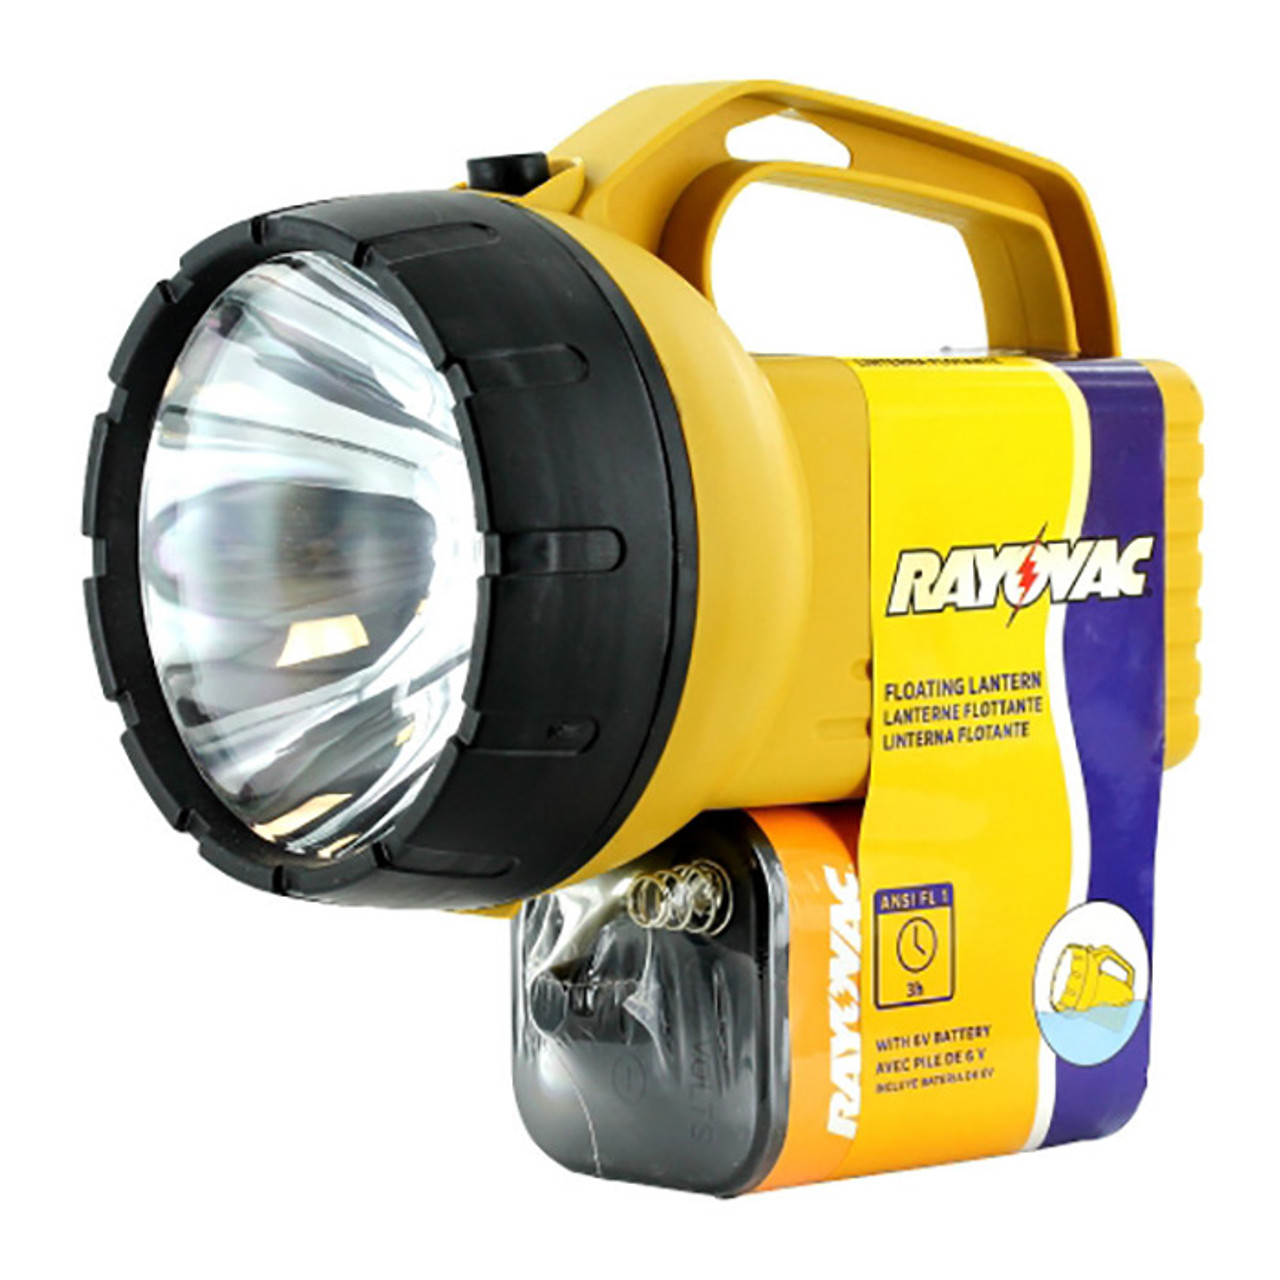 Rayovac Value Bright Lantern, 6 V Battery (Included), Assorted